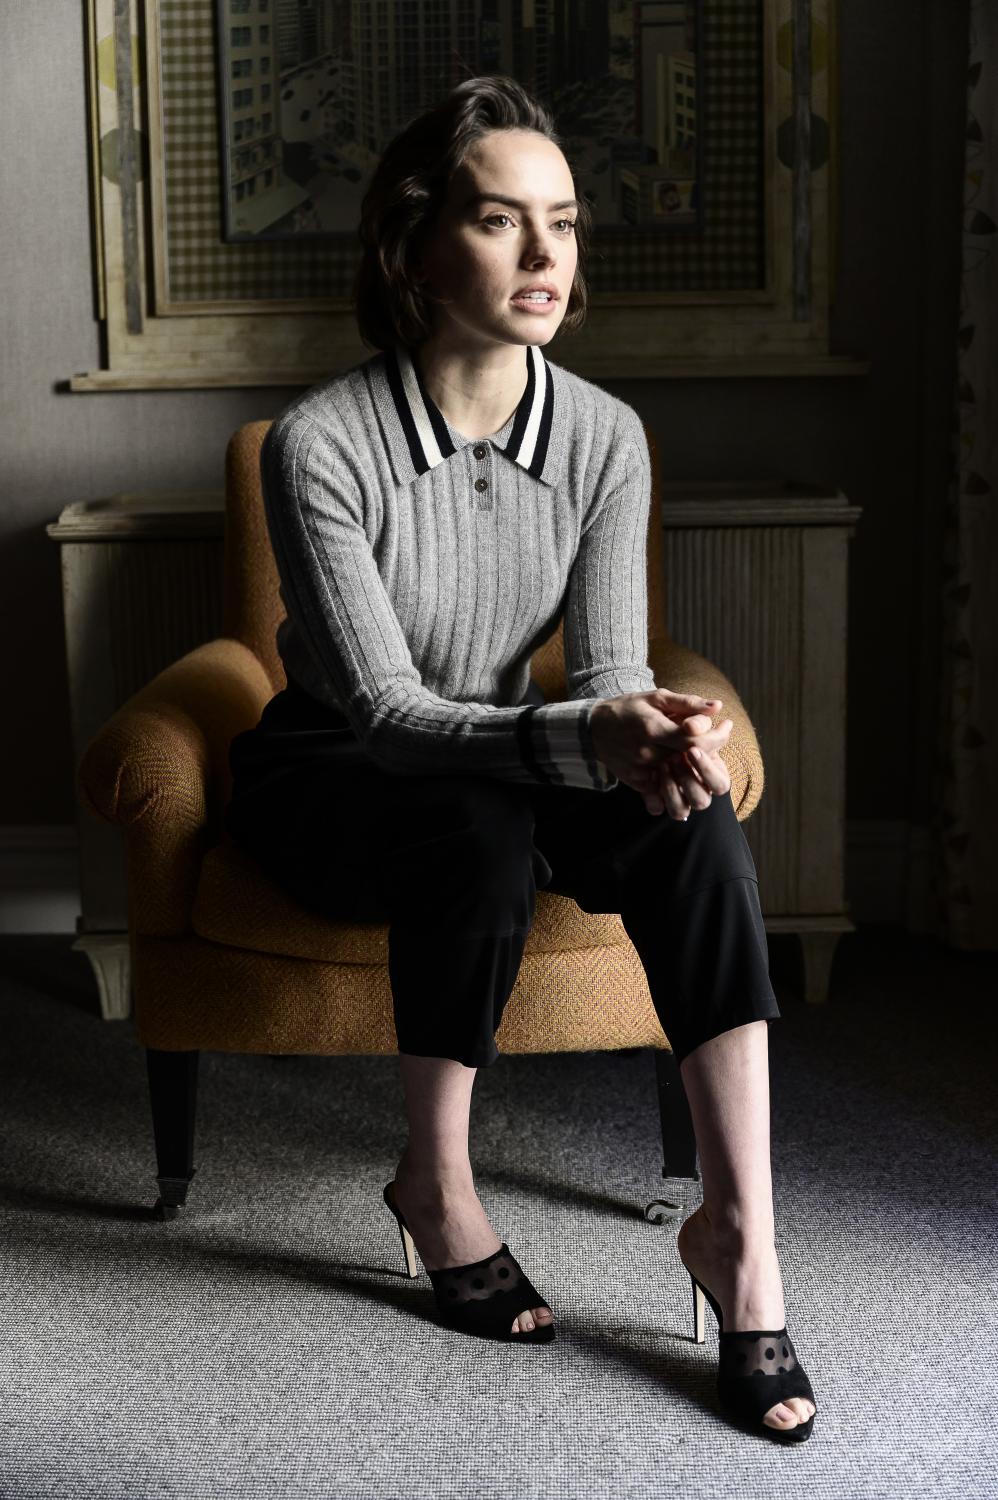 People - Daisy Ridley for USA Today.